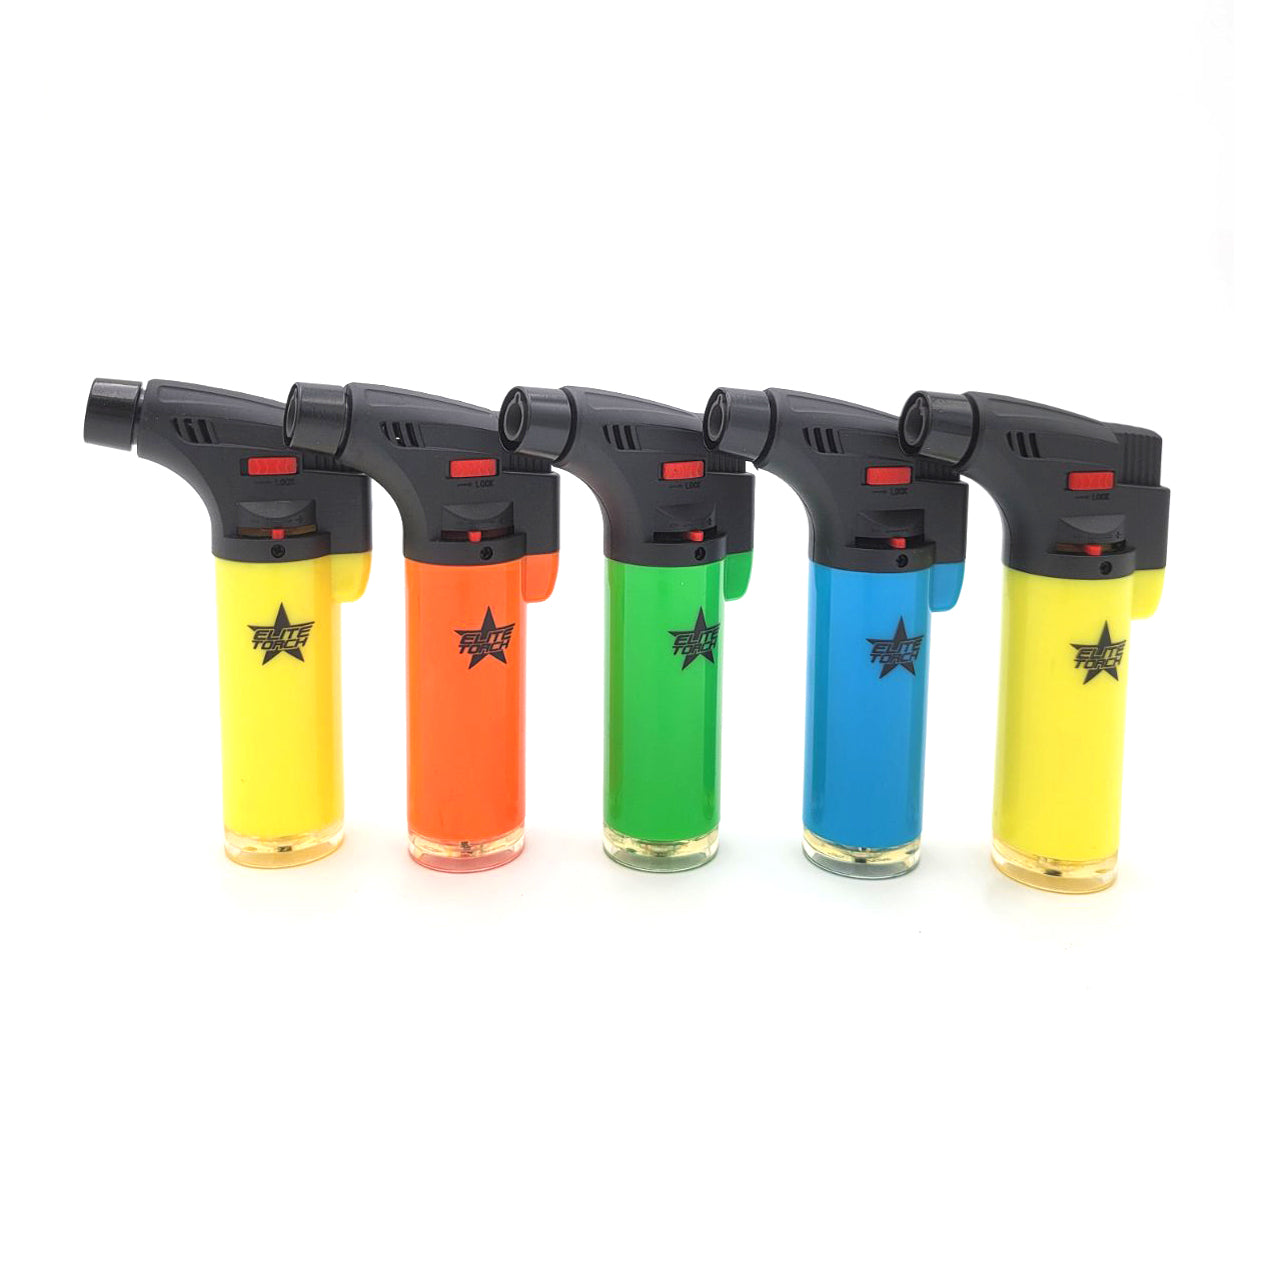 Neon Torch Lighters